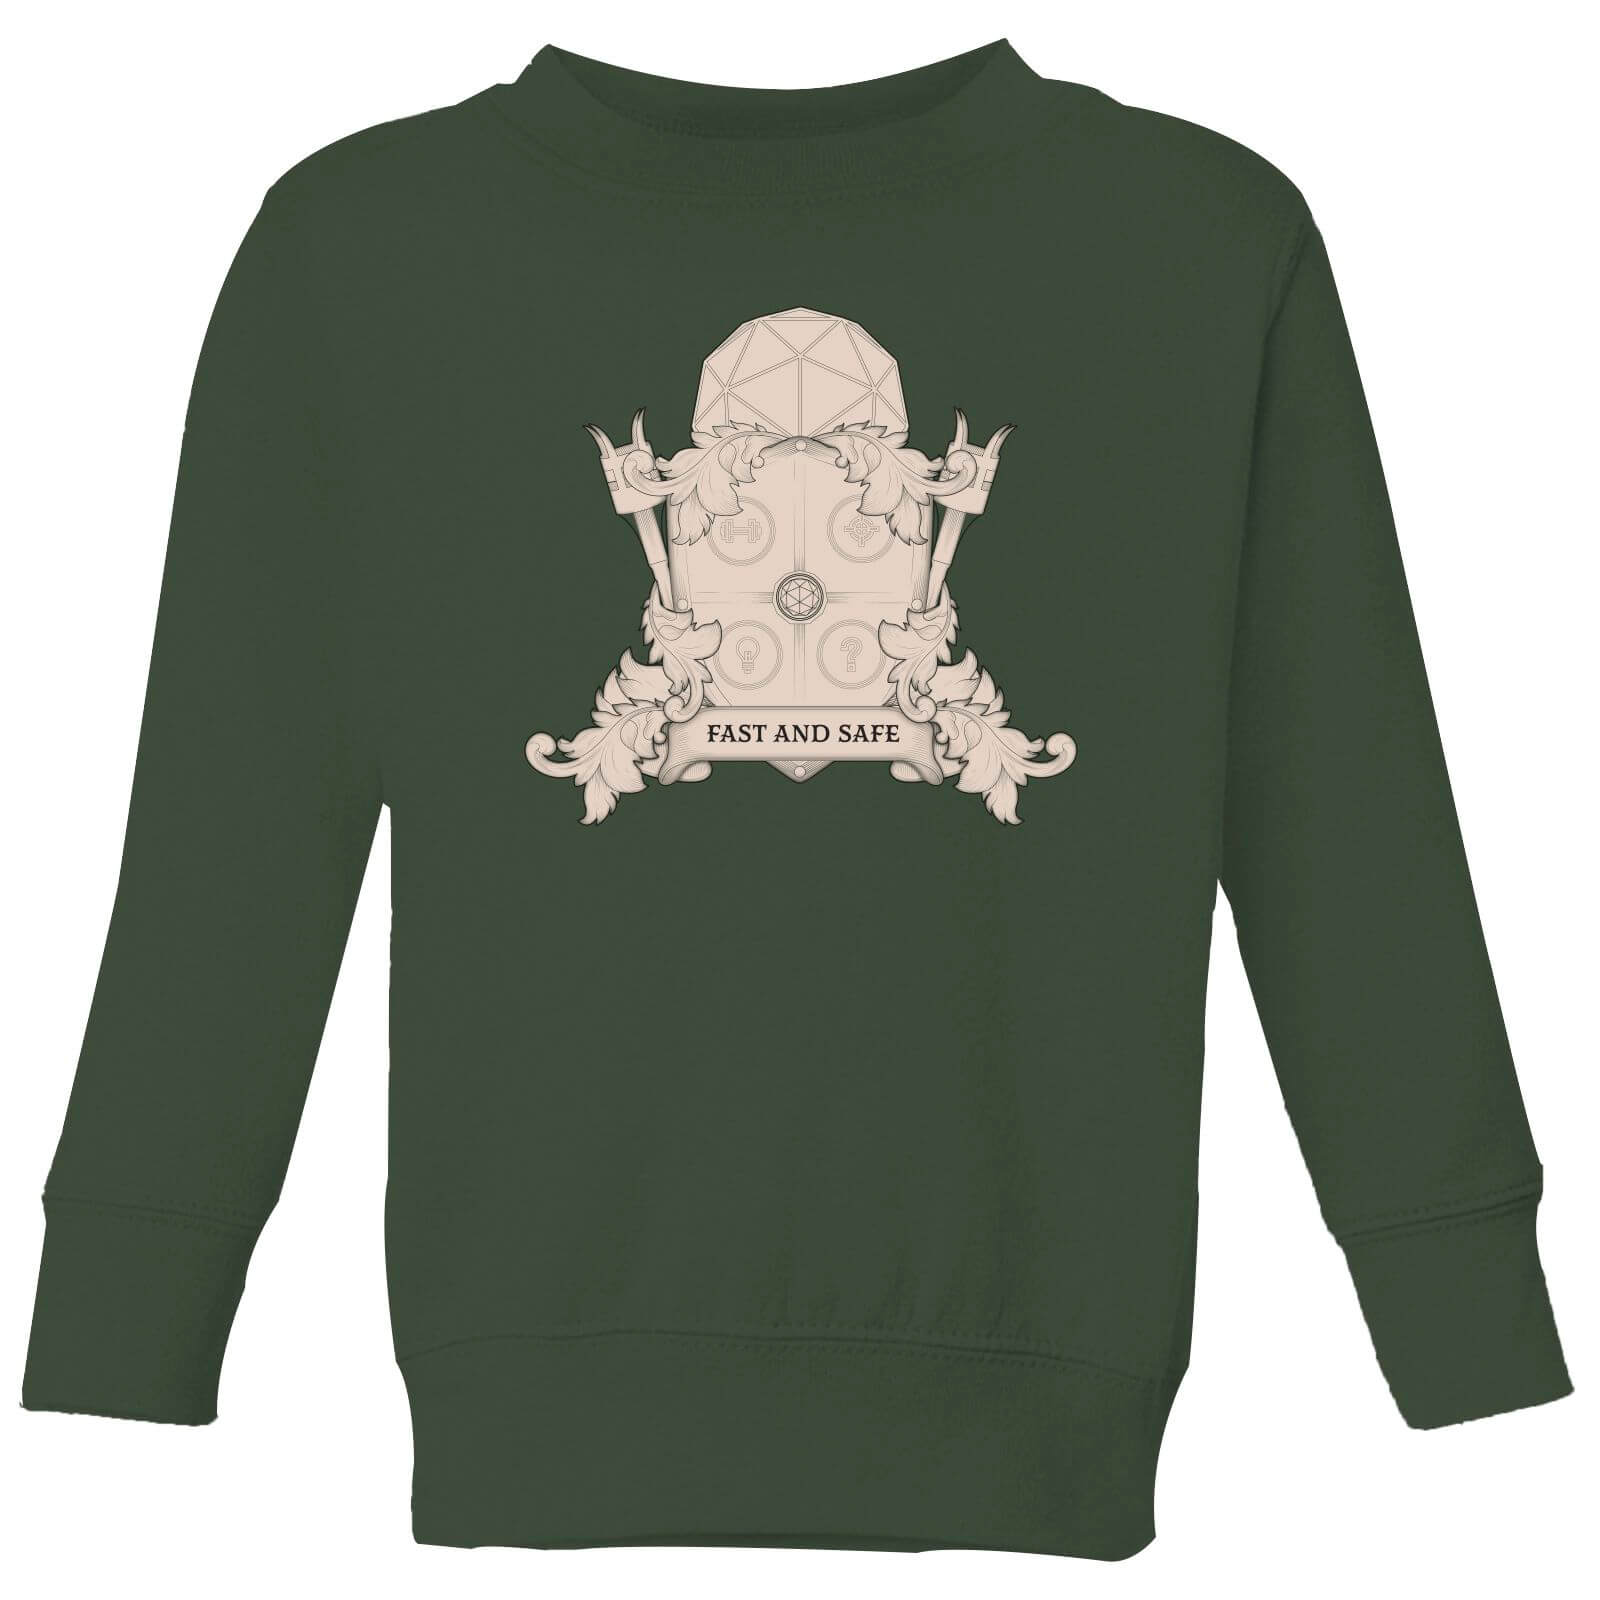 Crystal Maze Fast And Safe Crest Kids' Sweatshirt - Forest Green - 3-4 Years - Forest Green